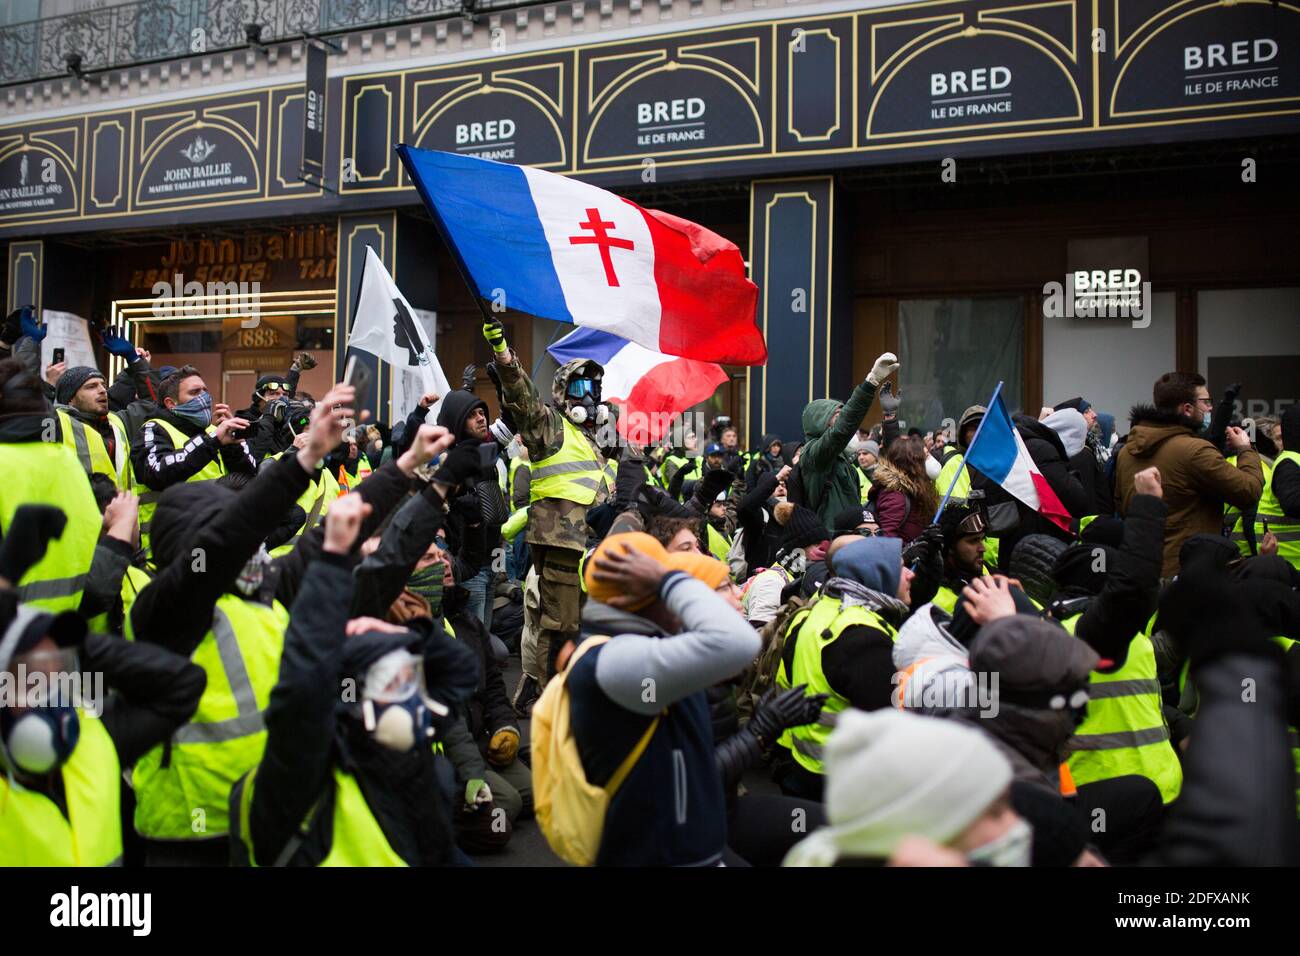 Yellow Vest (Gilets Jaunes) with a Cross of Lorraine (Croix de Lorraine)  flag, used by Rassemblement National party in front of the Opera Garnier,  in Paris on December 15, 2018, during a